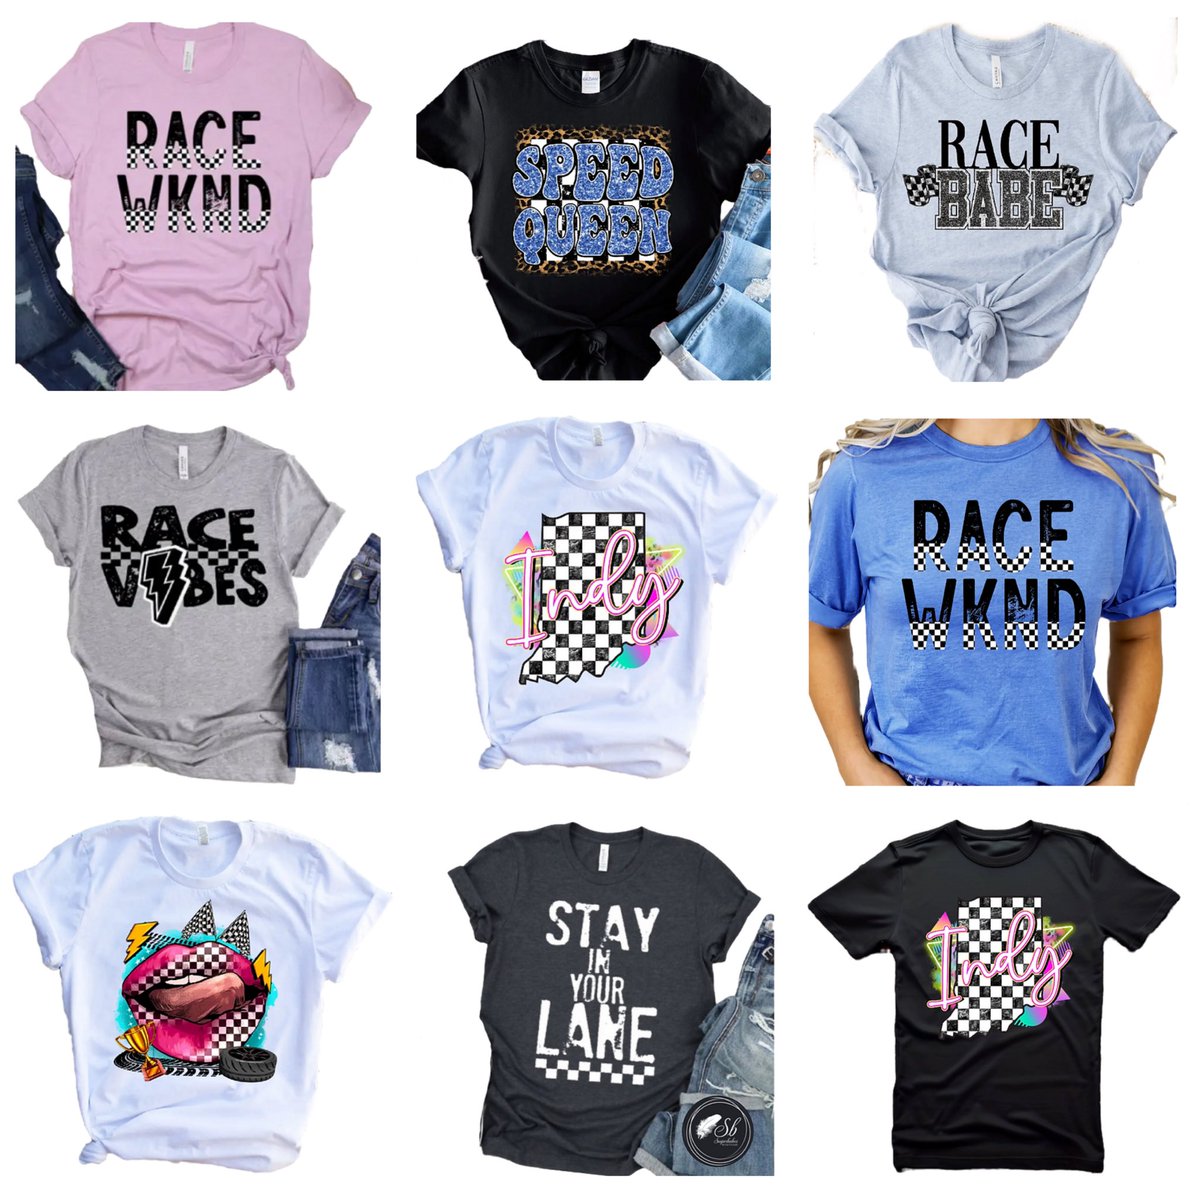 THERE’S STILL TIME TO PRE-ORDER FROM OUR RACE DAY COLLECTION! 🏁🔥 These designs and more are available for pre-order now through Sunday! 

Order now👇🏻
sugarbabesboutique.net/race-gear

#shopSBB #racegear #thisismay #indy500 #raceday #indyboutiques #indycar #dirtcar #indianapolis